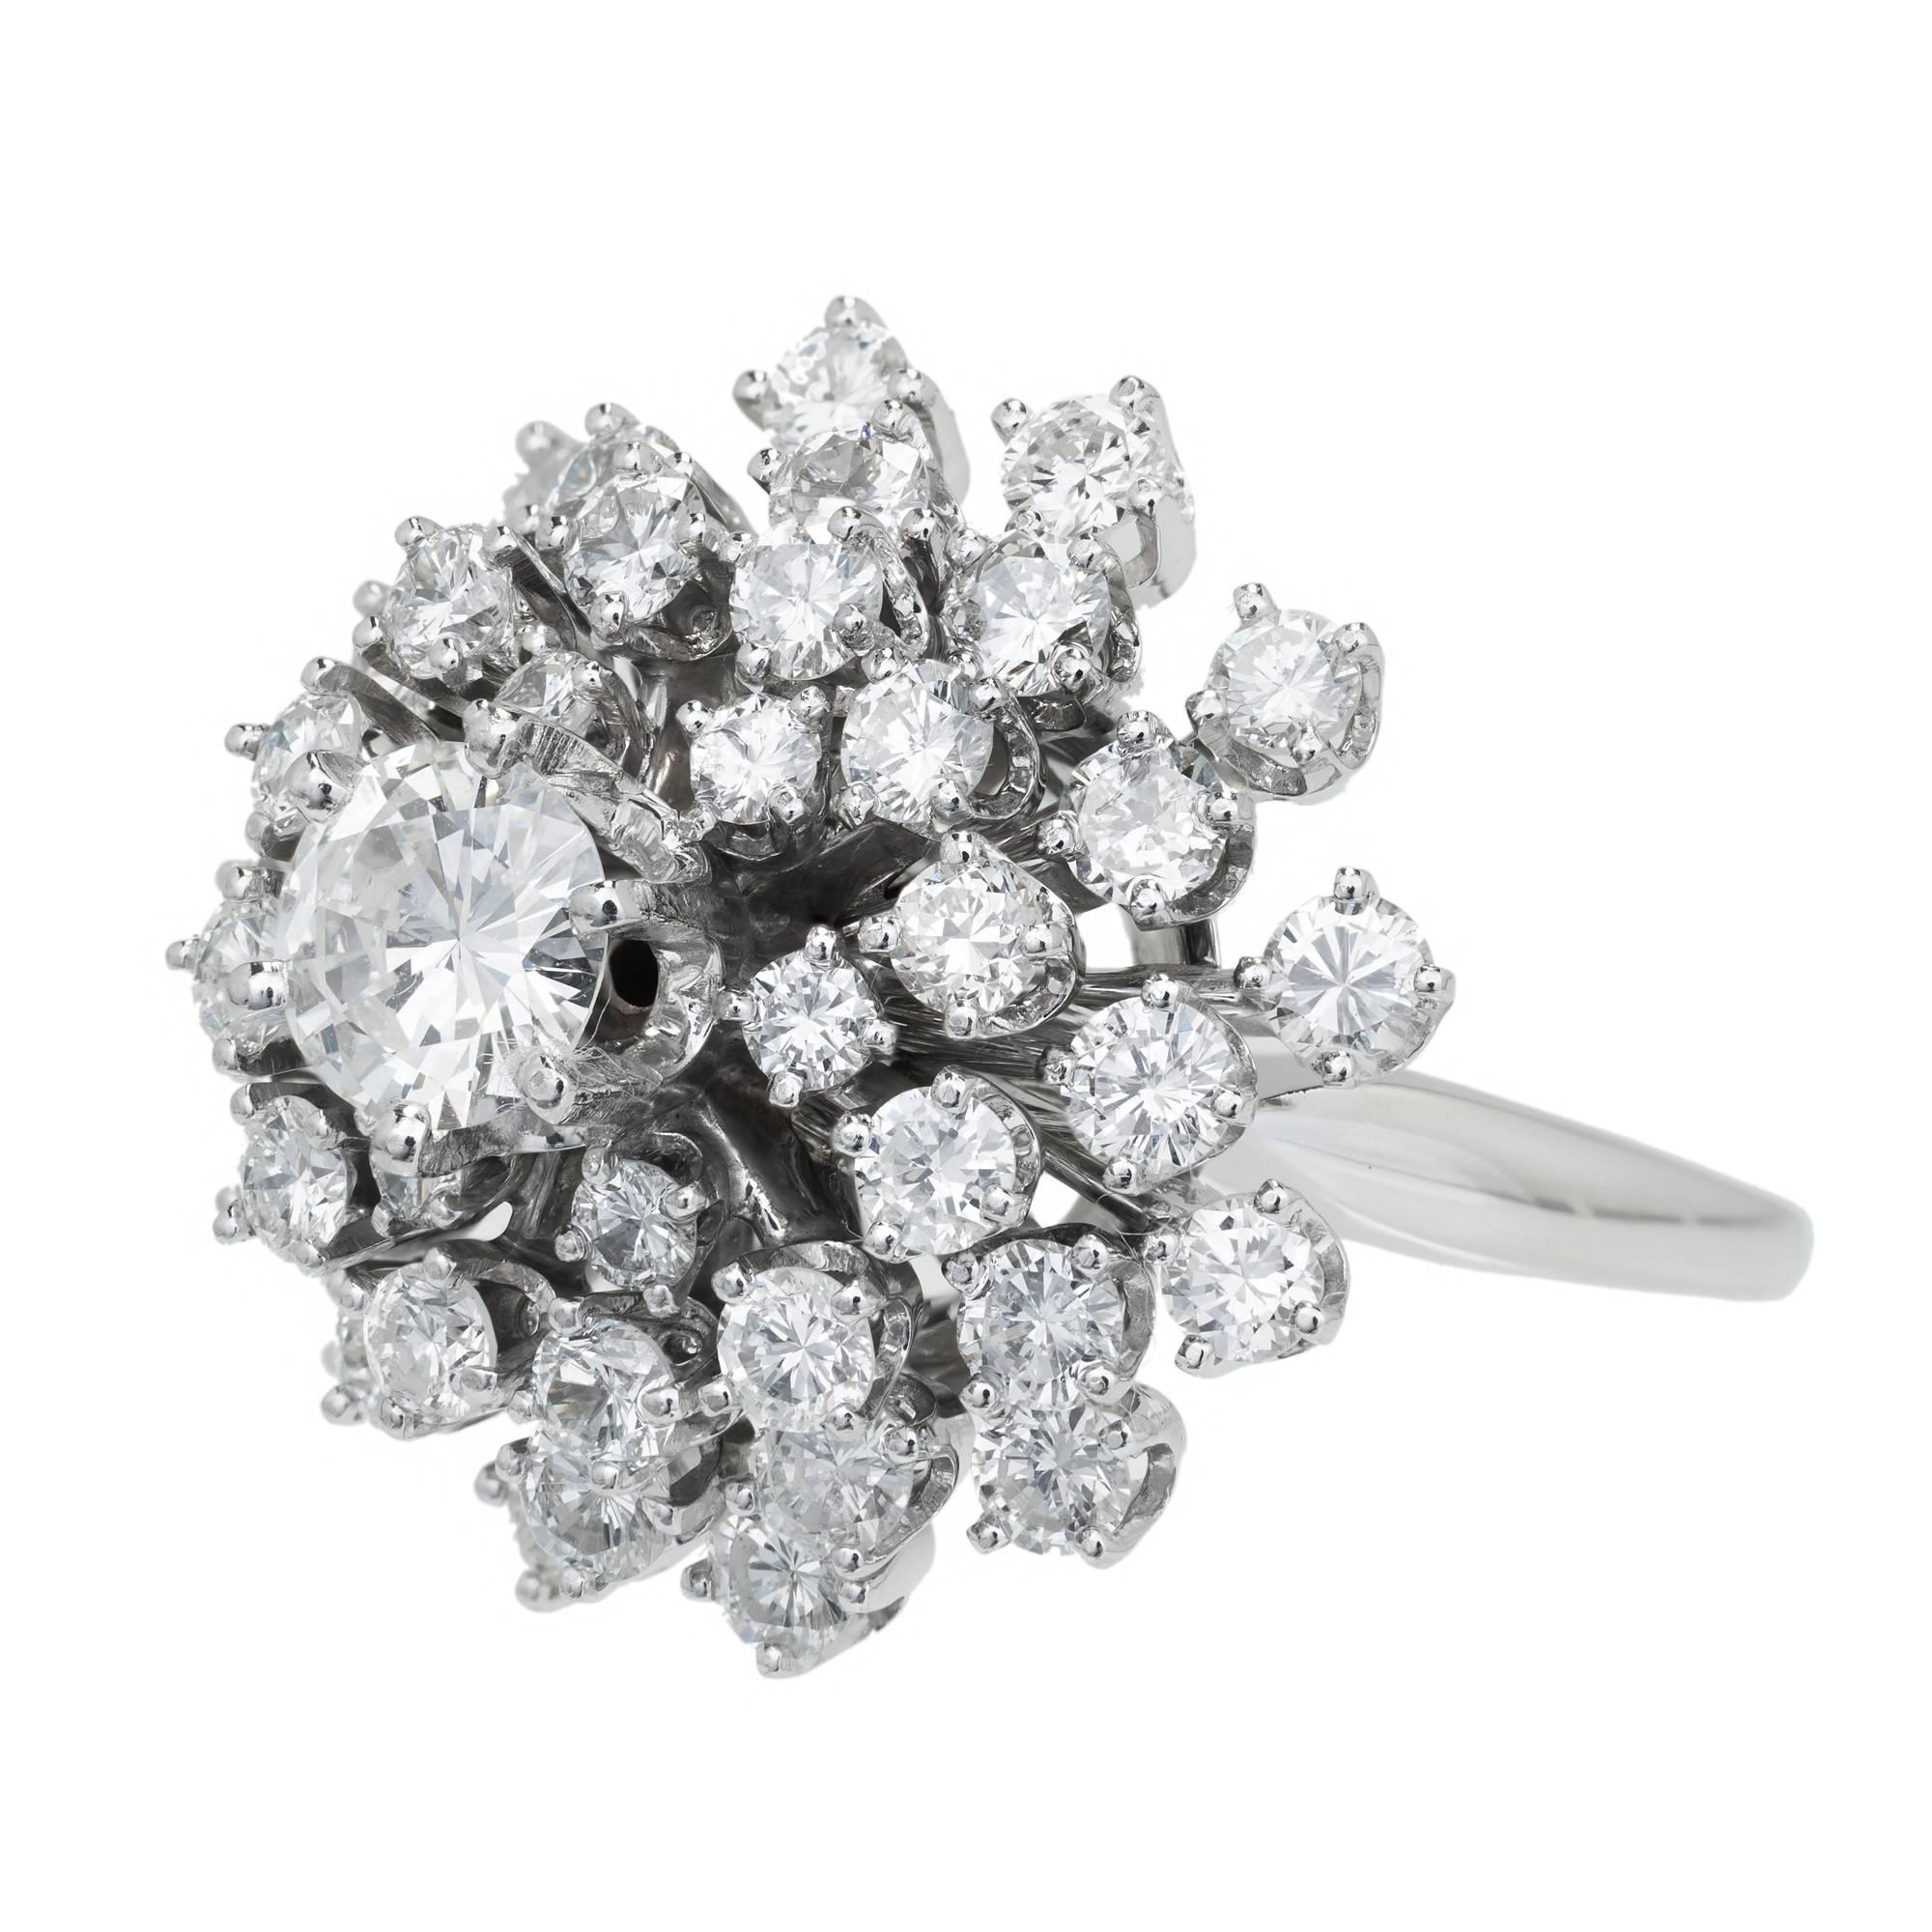 Spectacular vintage 1960's raised domed diamond cluster cocktail ring. EGL certified .80cts center diamond with 43 bright round cut diamonds in a tiered 14k white gold cluster setting.

1 transitional cut Diamond, approx. total weight .80cts, F – G,